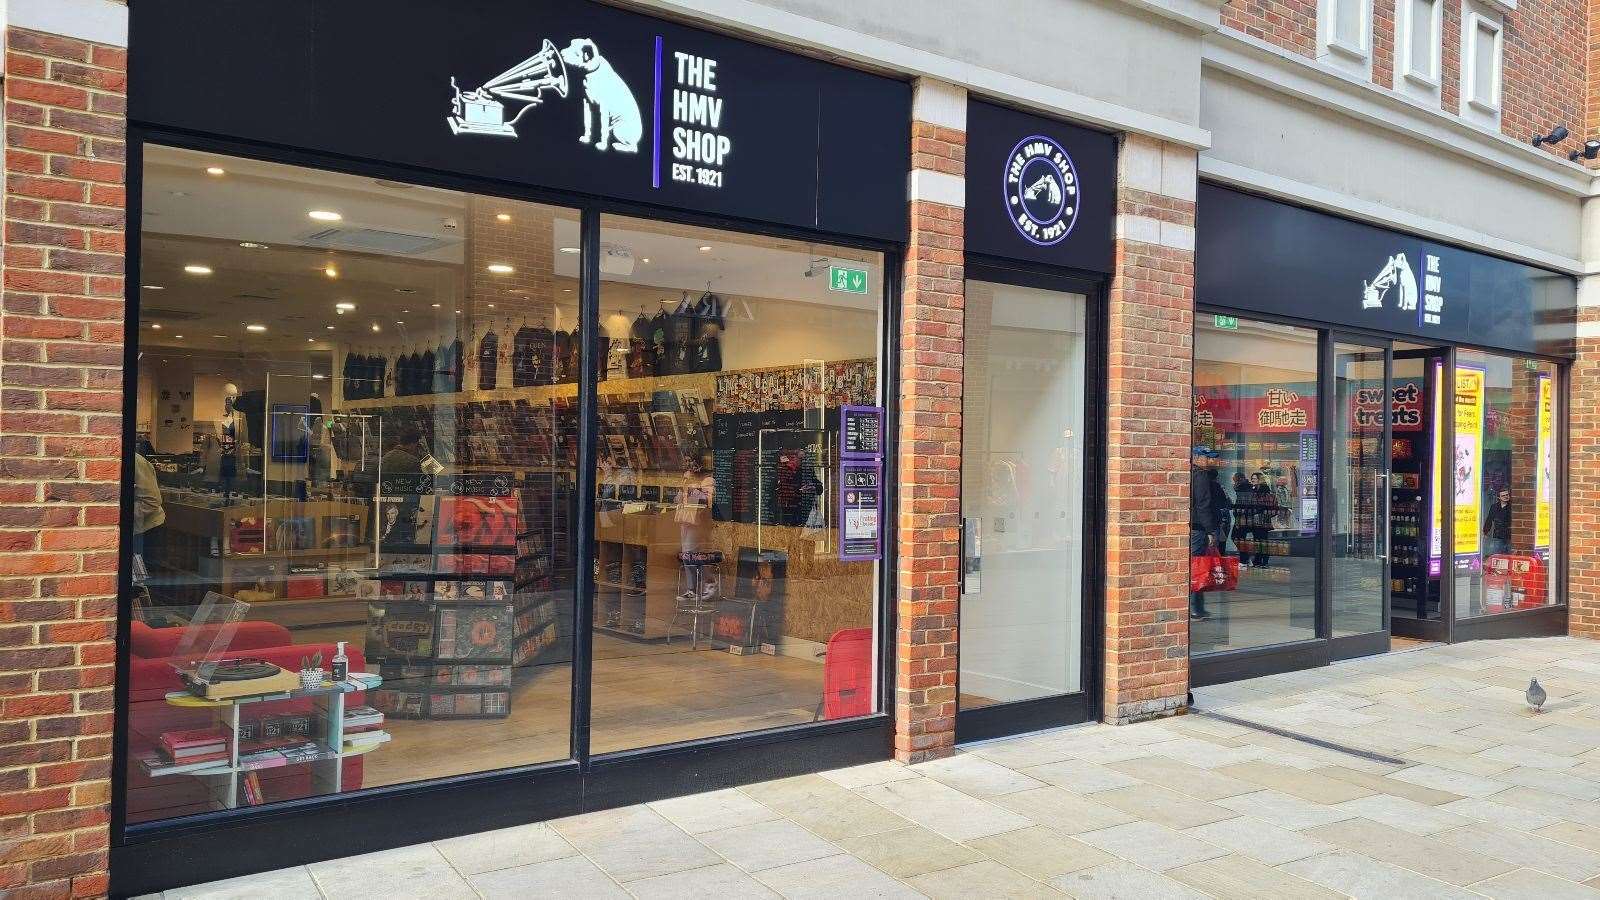 HMV has moved to a smaller store in the main Whitefriars precinct